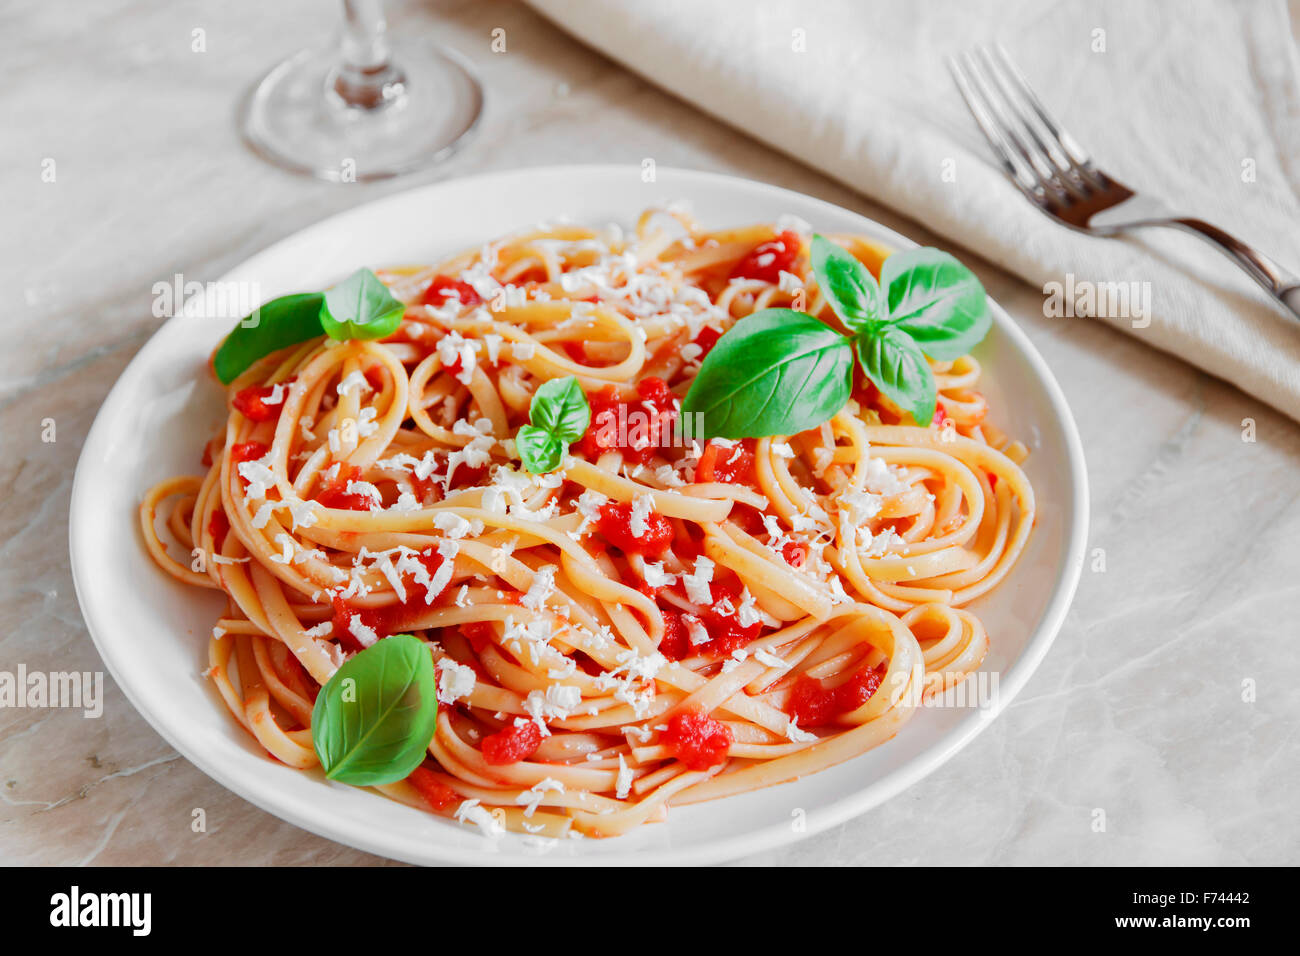 Linguine pasta in tomato sauce and cheese on a plate Stock Photo